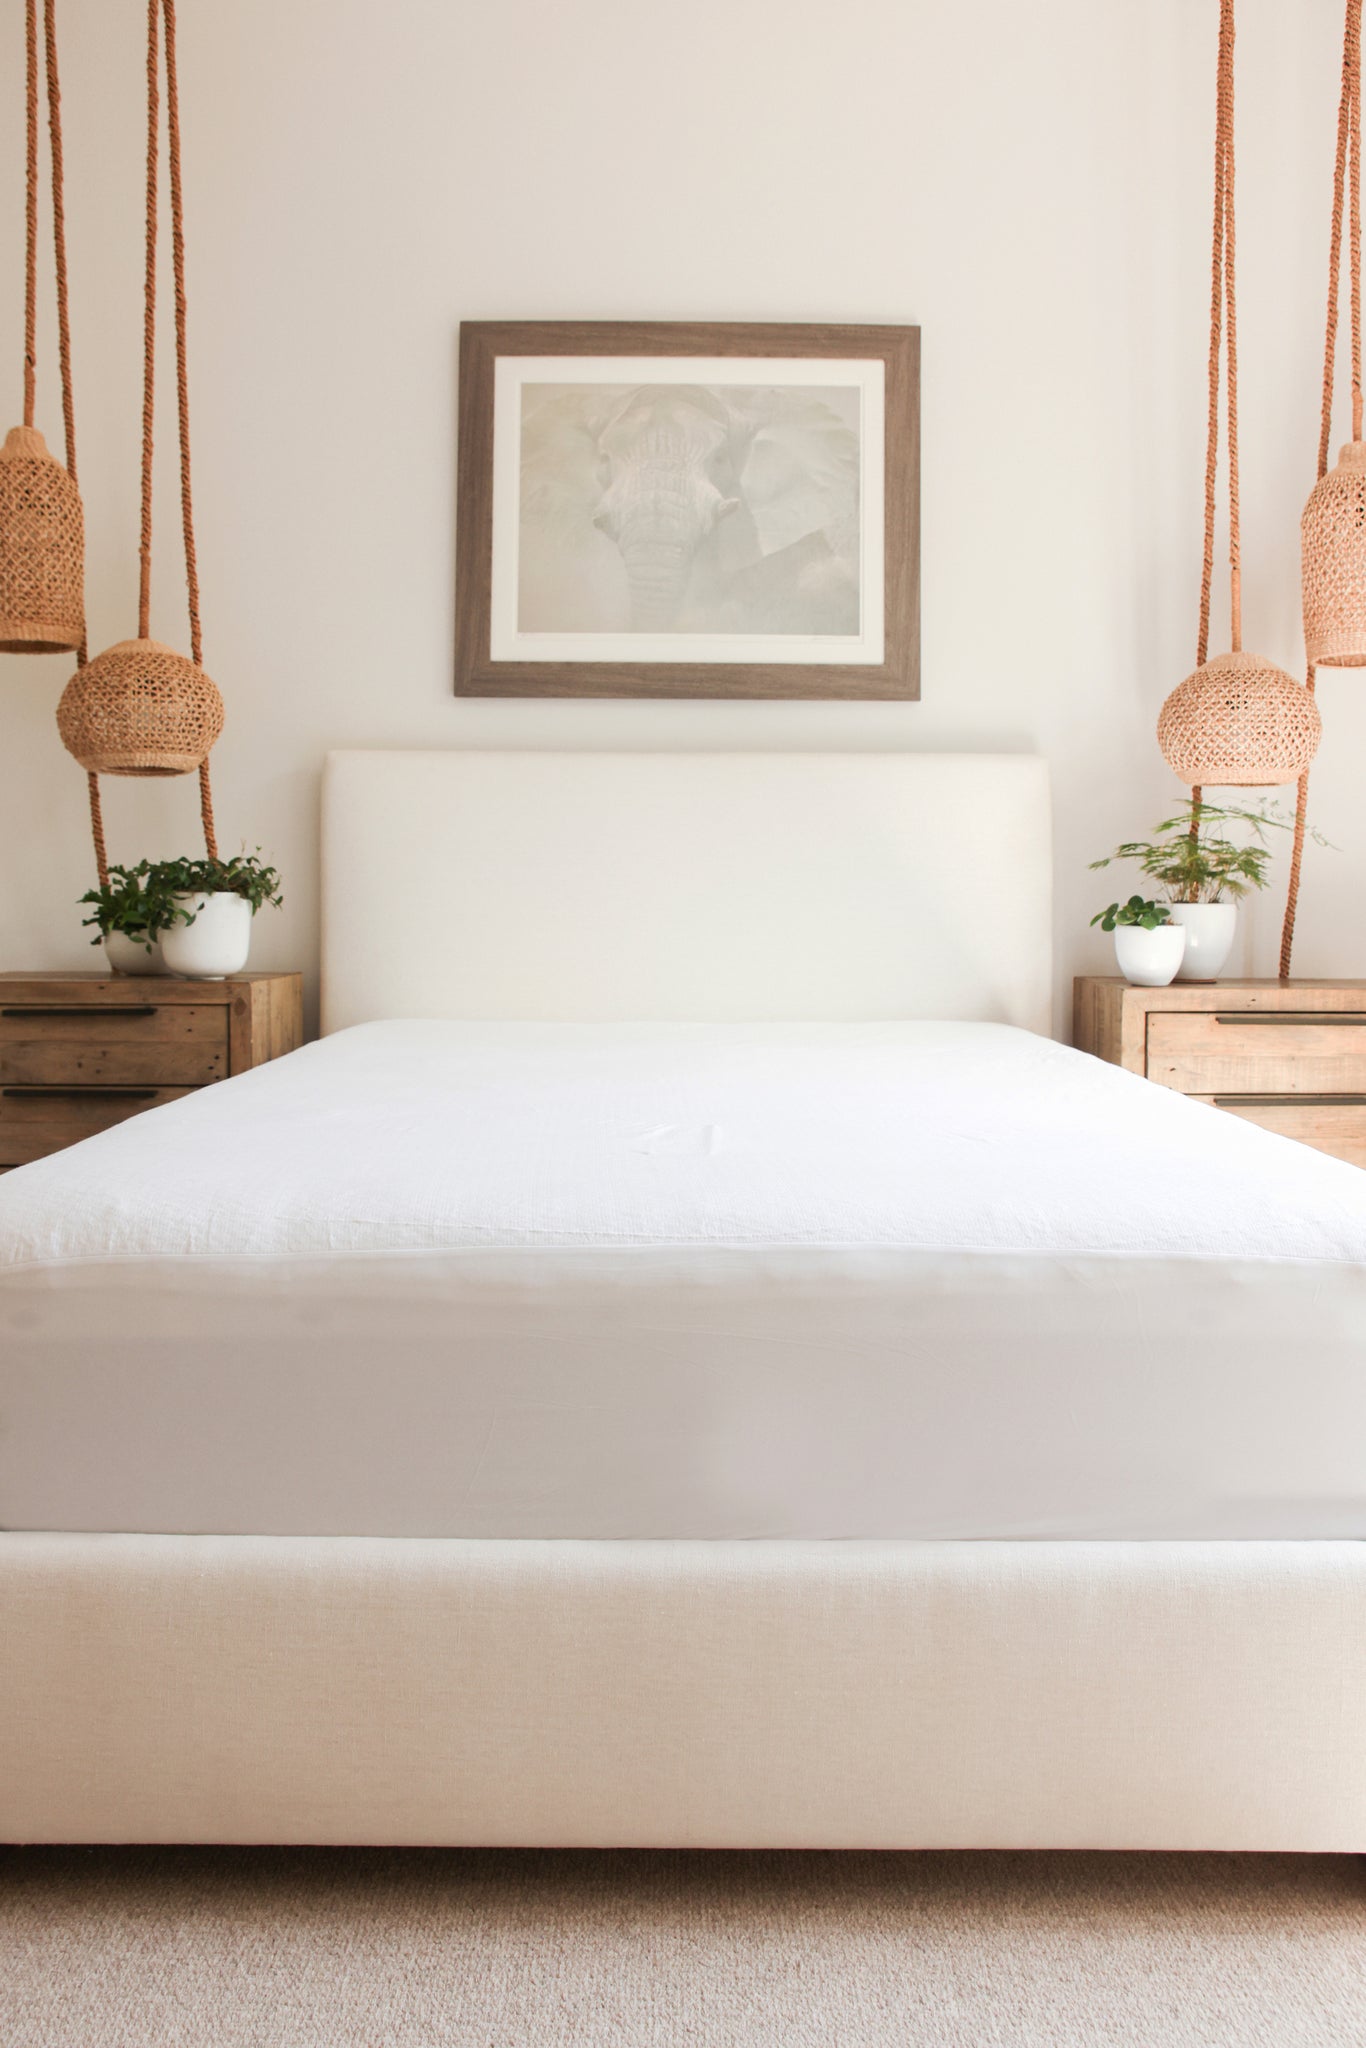 Why You Need a Mattress Protector